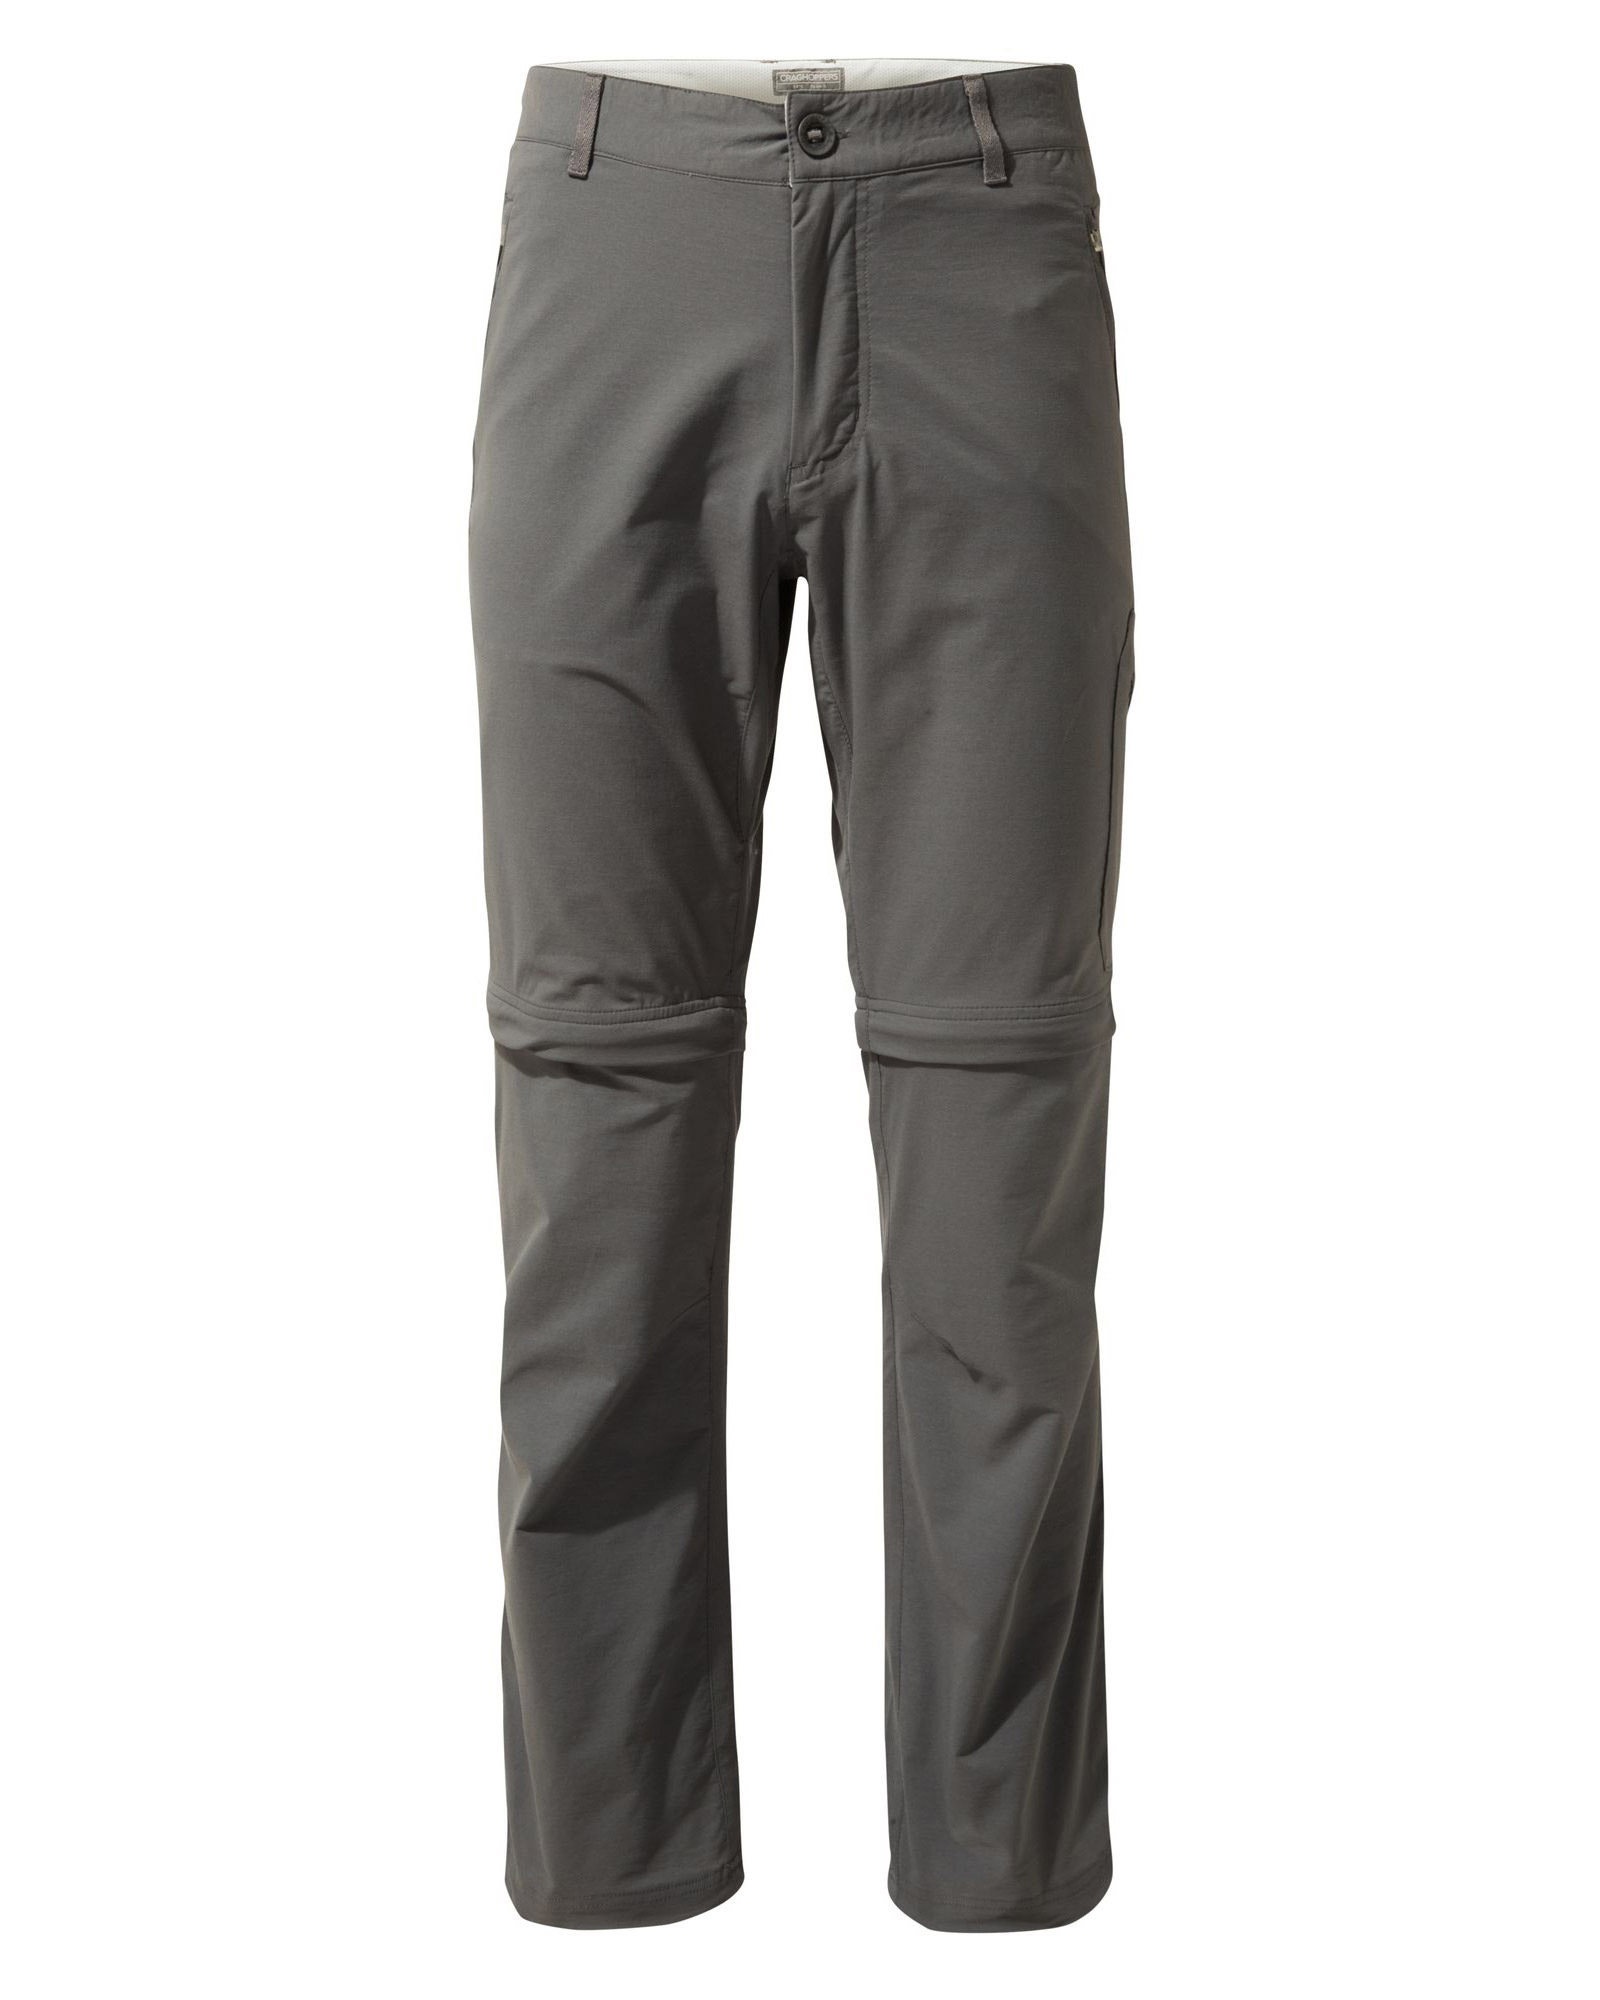 Craghoppers Nosilife Pro Stretch Mens Convertible Pants